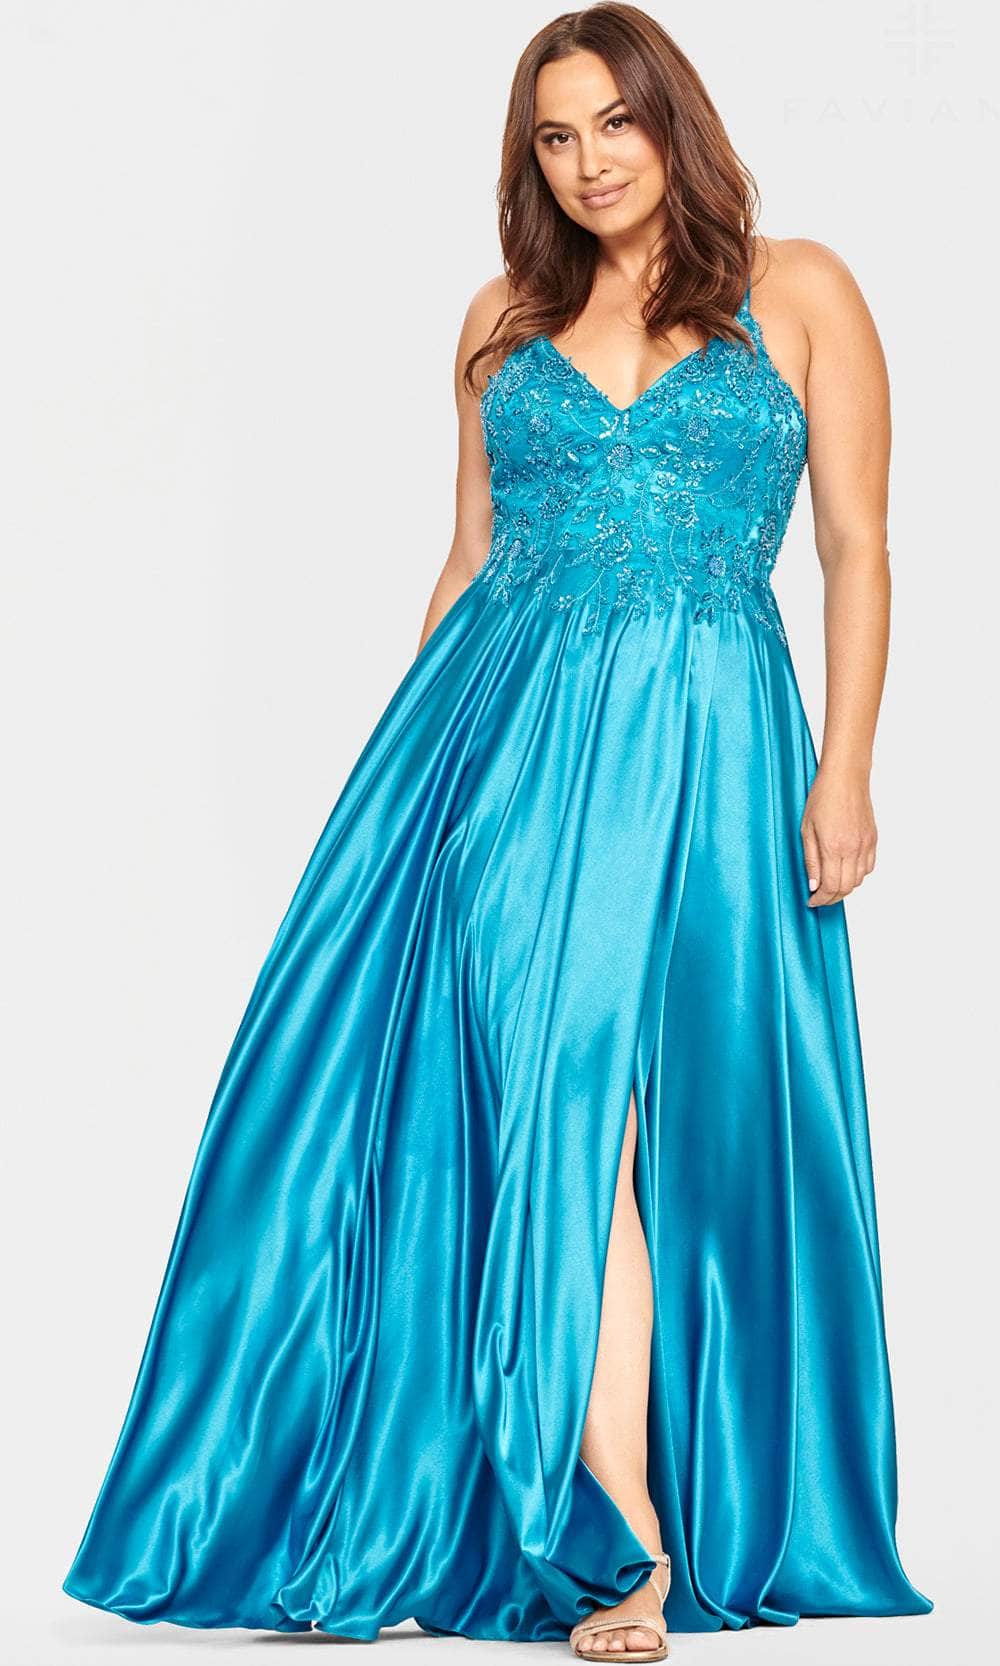 Faviana 9533 - Embroidered Charmeuse Evening Dress
